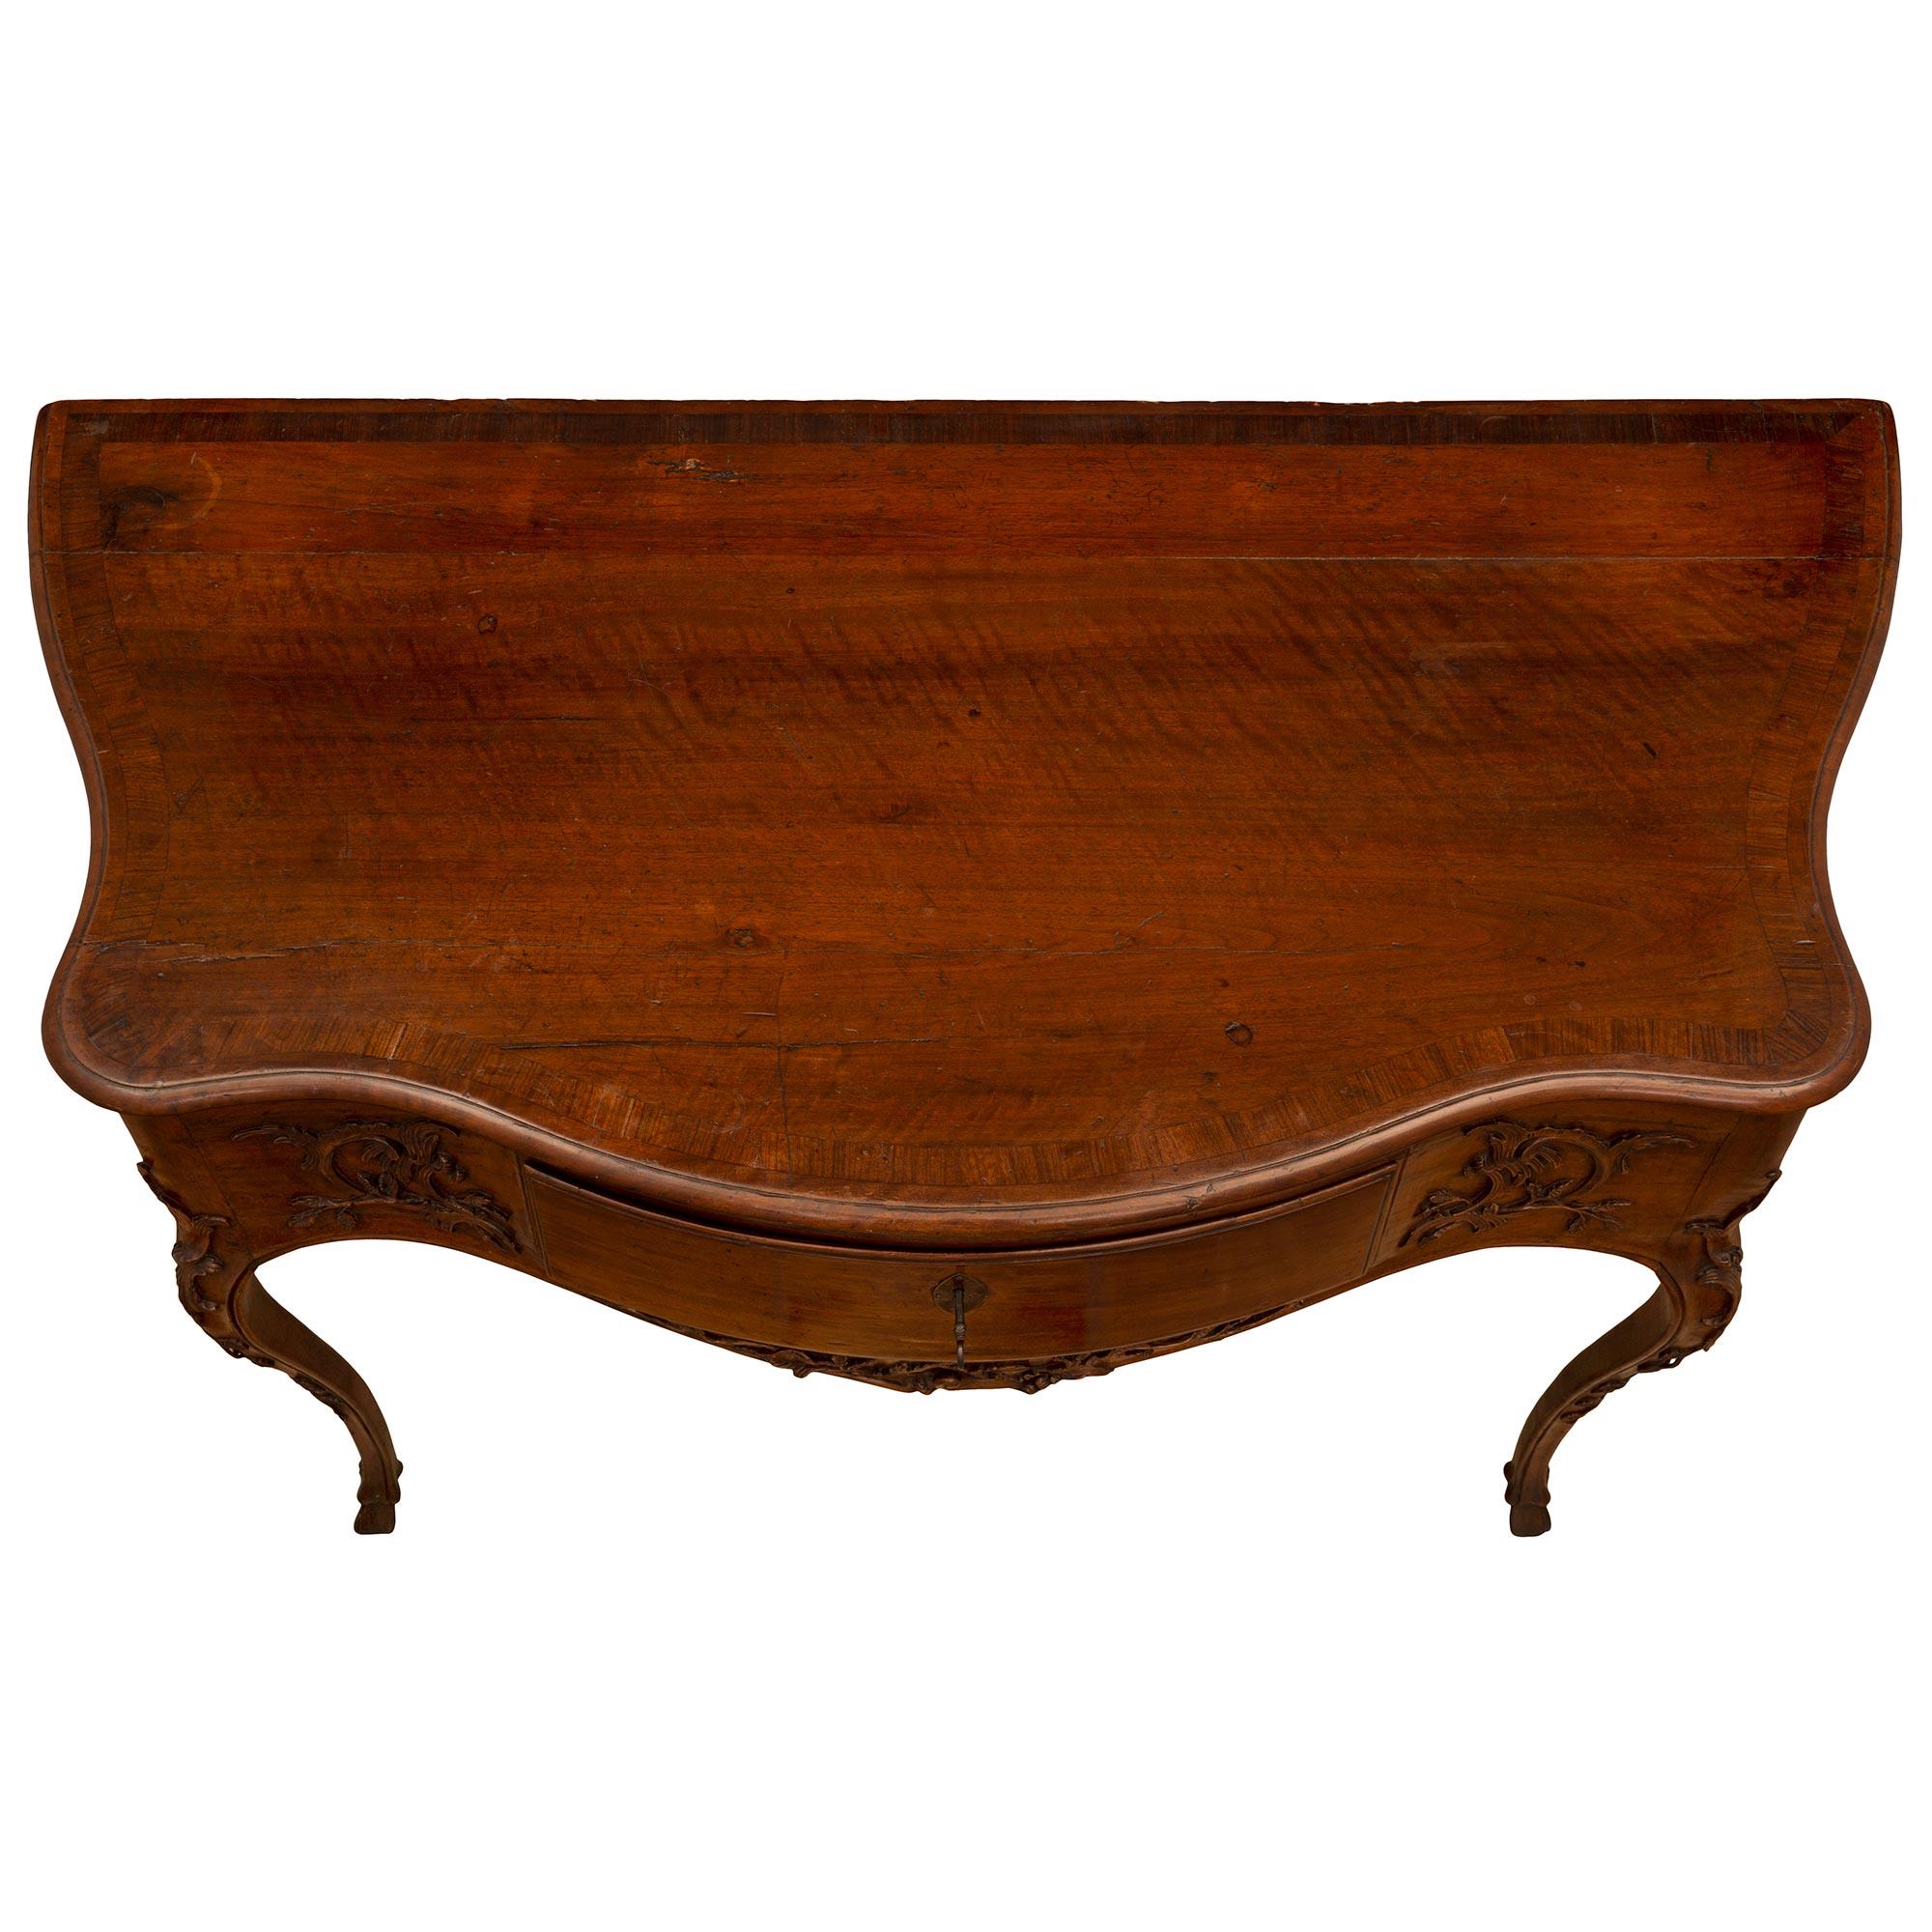 A most elegant and high quality Italian mid 18th century Louis XV period walnut console. The freestanding console is raised by beautiful slender cabriole legs with hoof feet and charming finely detailed foliate carvings. The deep arbalest shaped